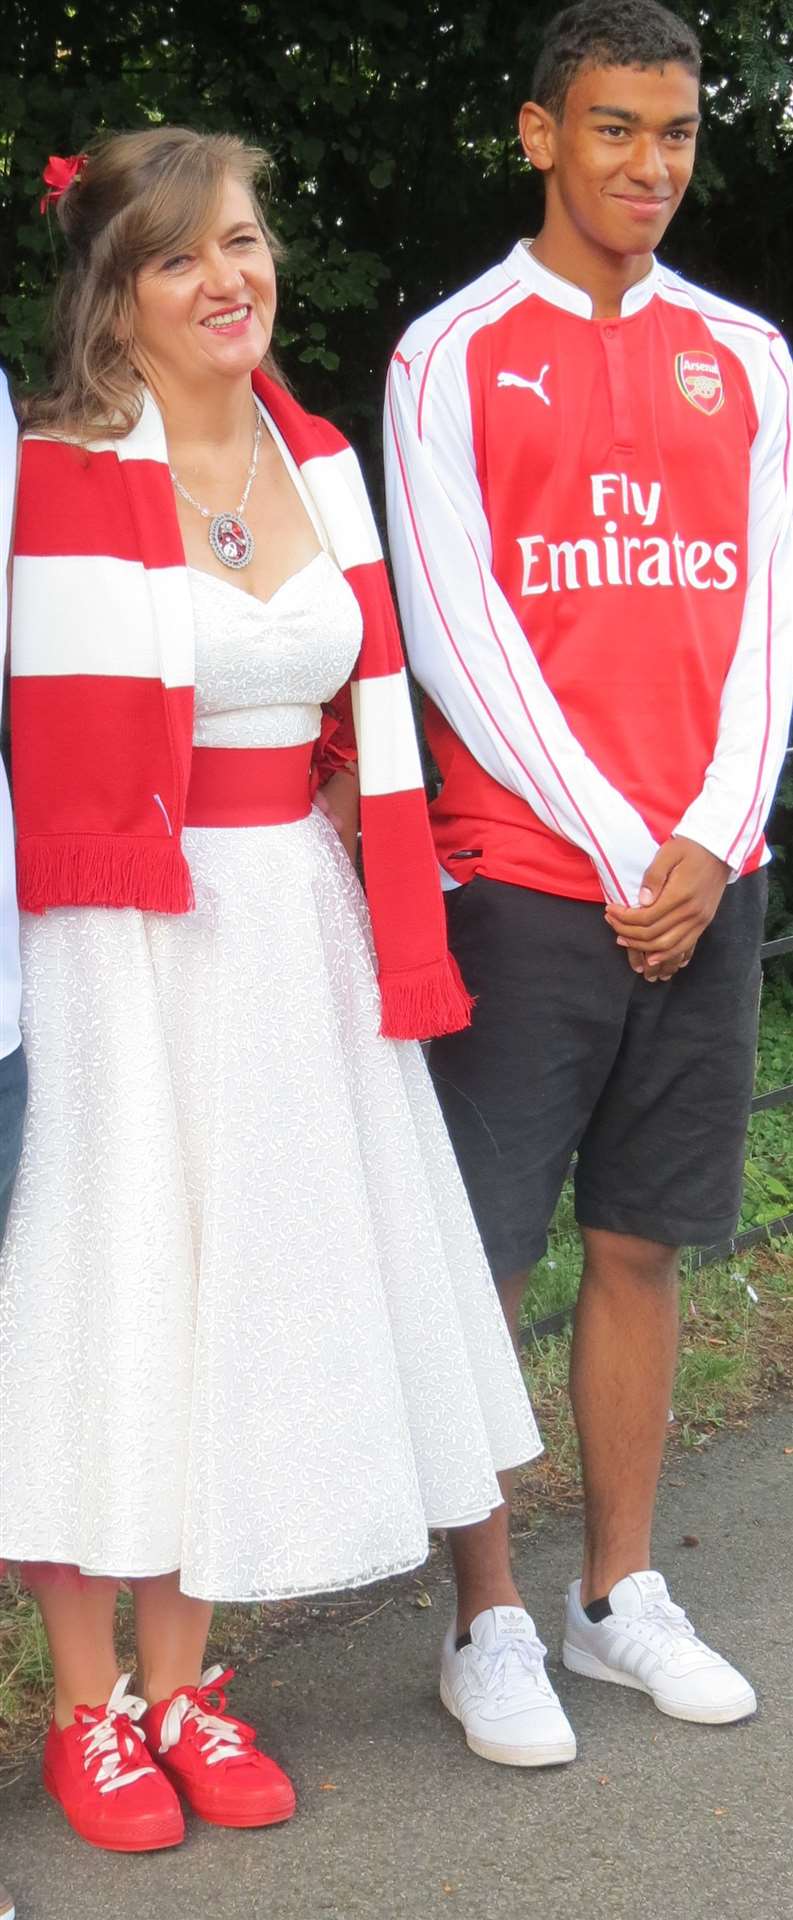 Vanessa Finch, from Margate, and her son at her wedding. She has won a prize as football team Arsenal's most avid fan.